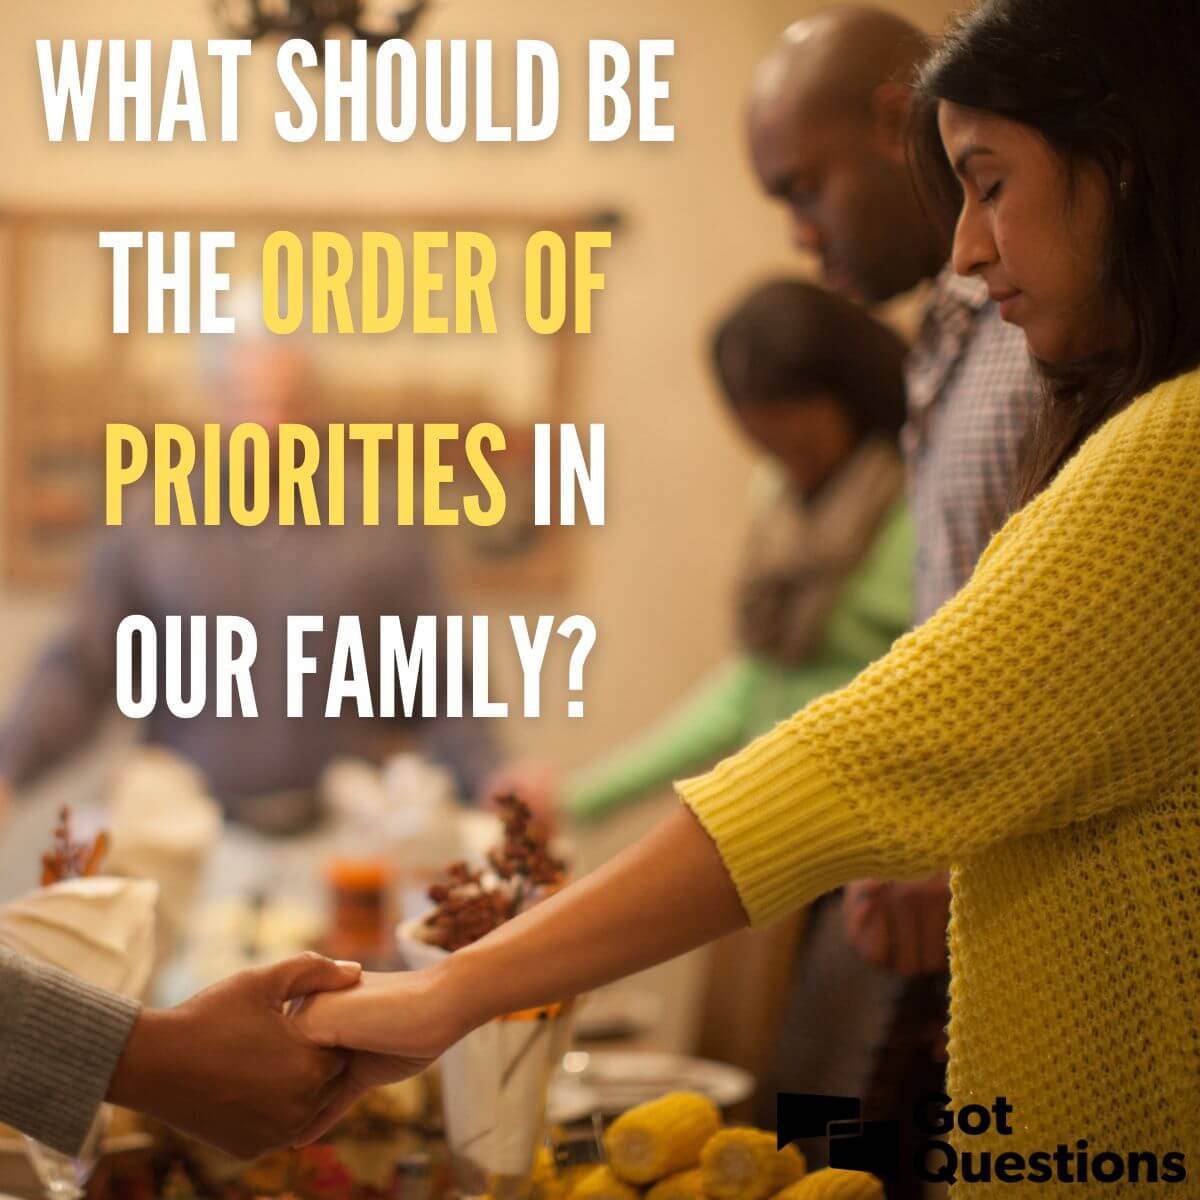 What should be the order of priorities in our family? | GotQuestions.org